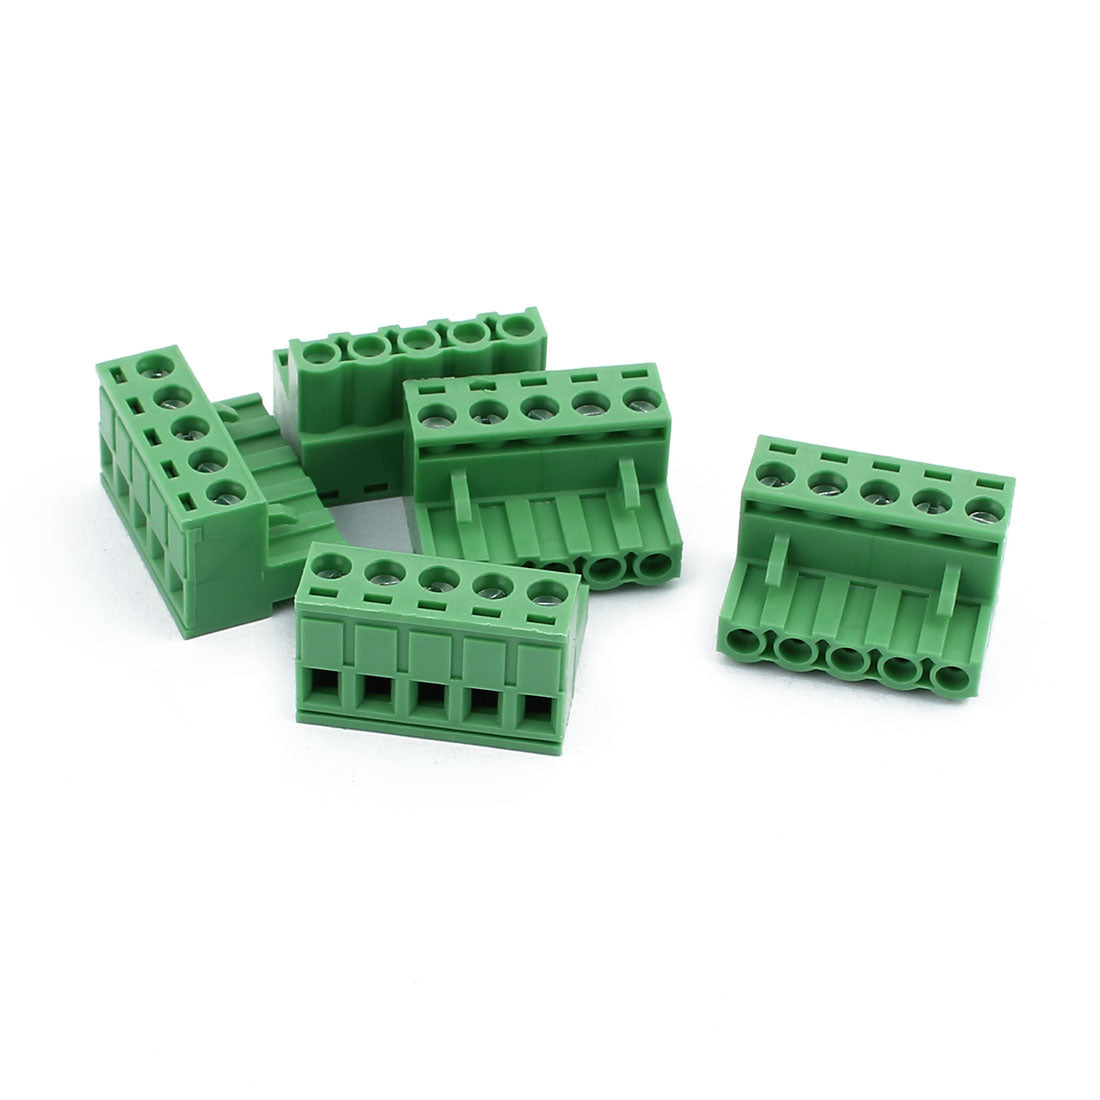 uxcell Uxcell 5Pcs 300V KF2EDGK 5.08mm Pitch 5-Pin PCB Screw Terminal Block Connector